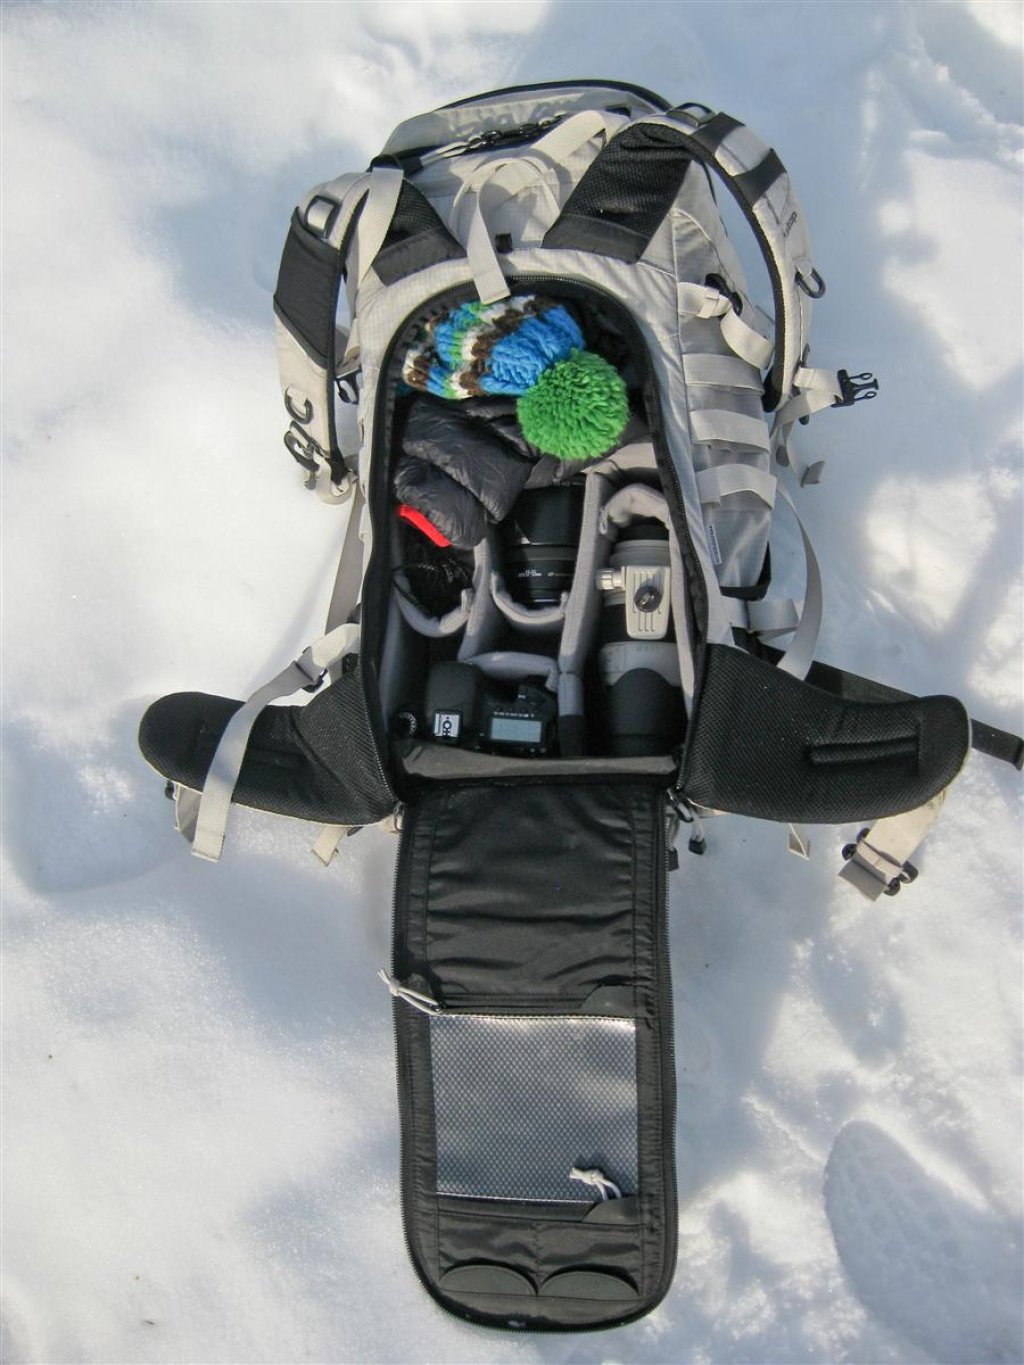 The camera compartment - the ICU - is easily accessible through the back flap. With the medium ICU, you can fit pretty much all the camera equipment you need on the mountain, and there is plenty of space above for your ski gear. Even for an overnight stay in a hut, you don't have to worry about running out of space. Small items such as filters, lens caps or memory cards can be easily stowed in the back lid.